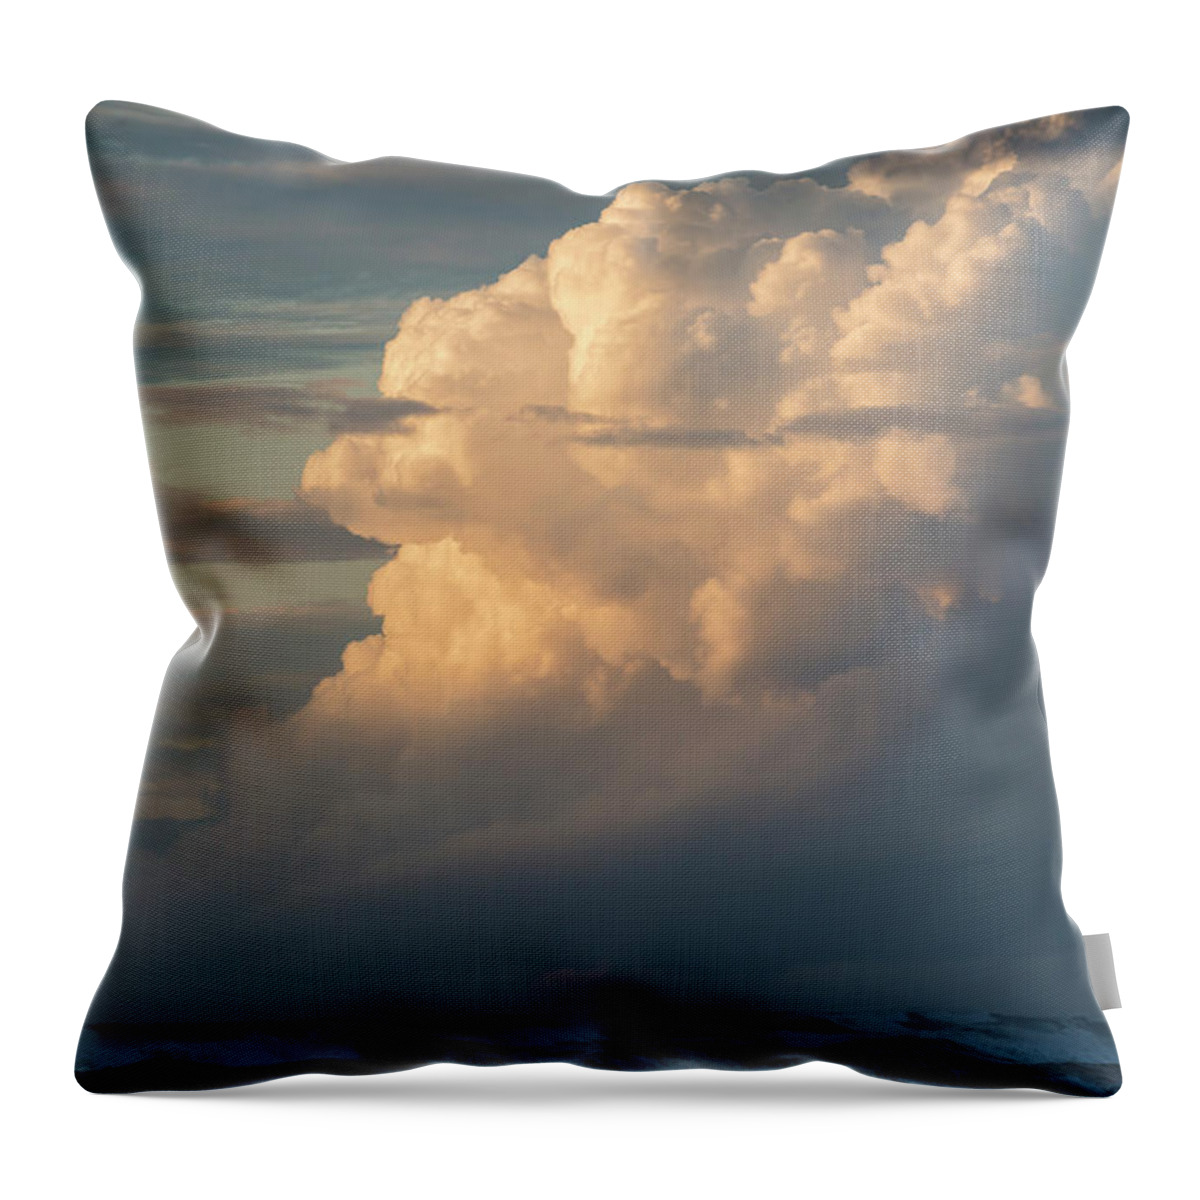 Clouds Throw Pillow featuring the photograph Clouds and Surf by Robert Potts